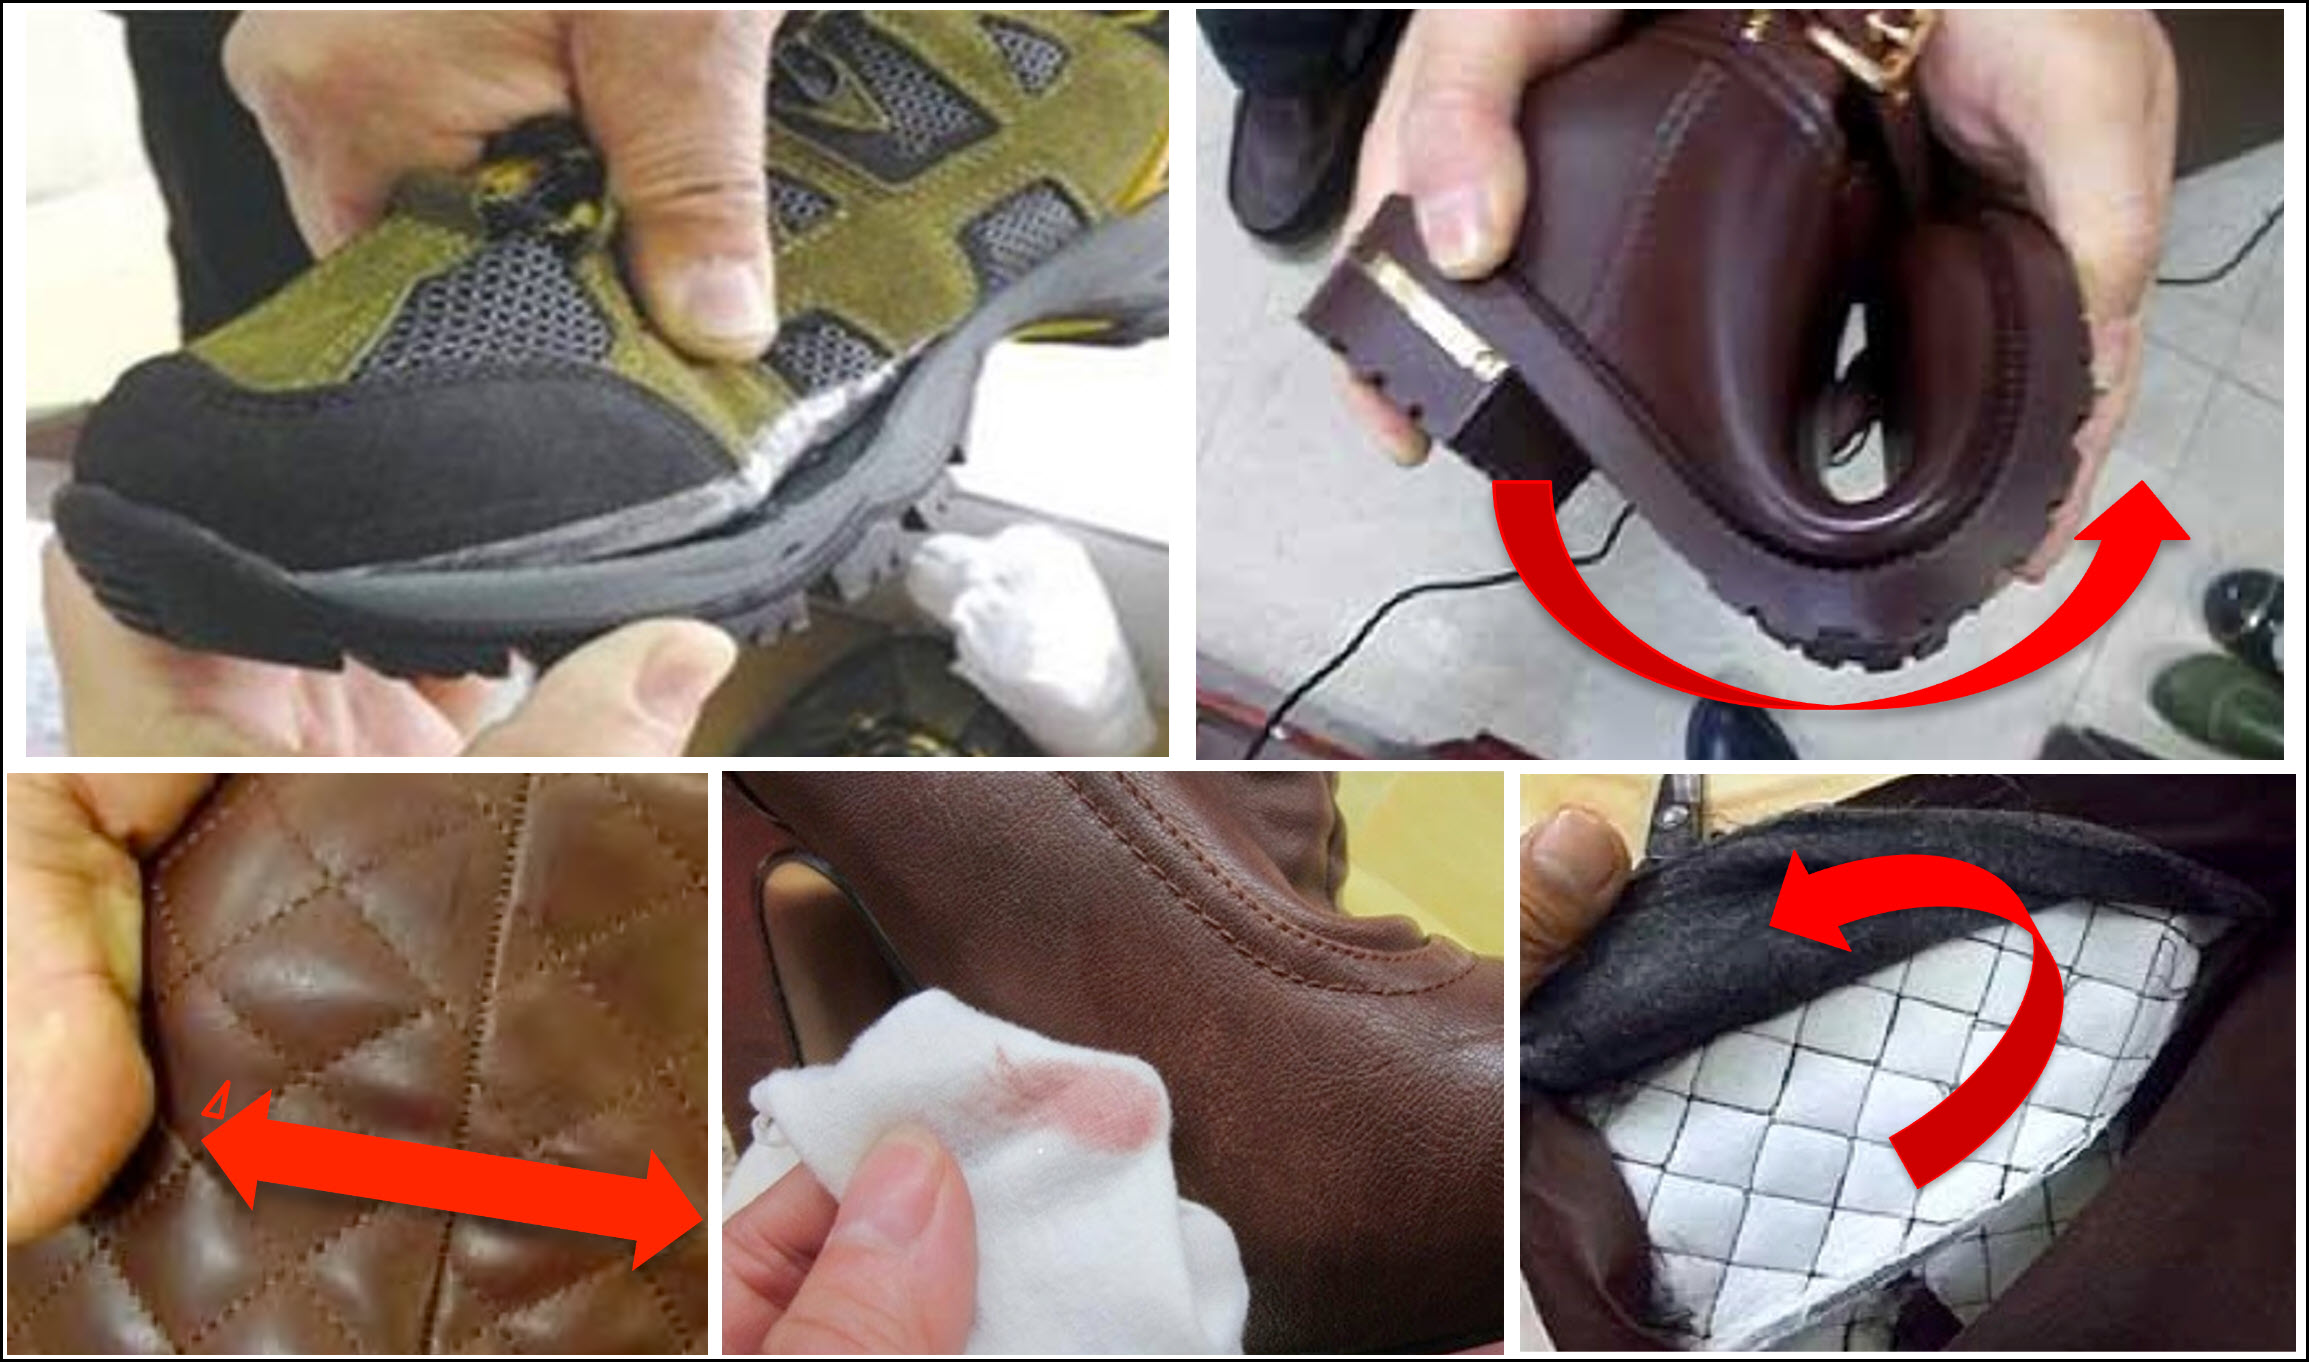 Special tests during the inspection for shoes